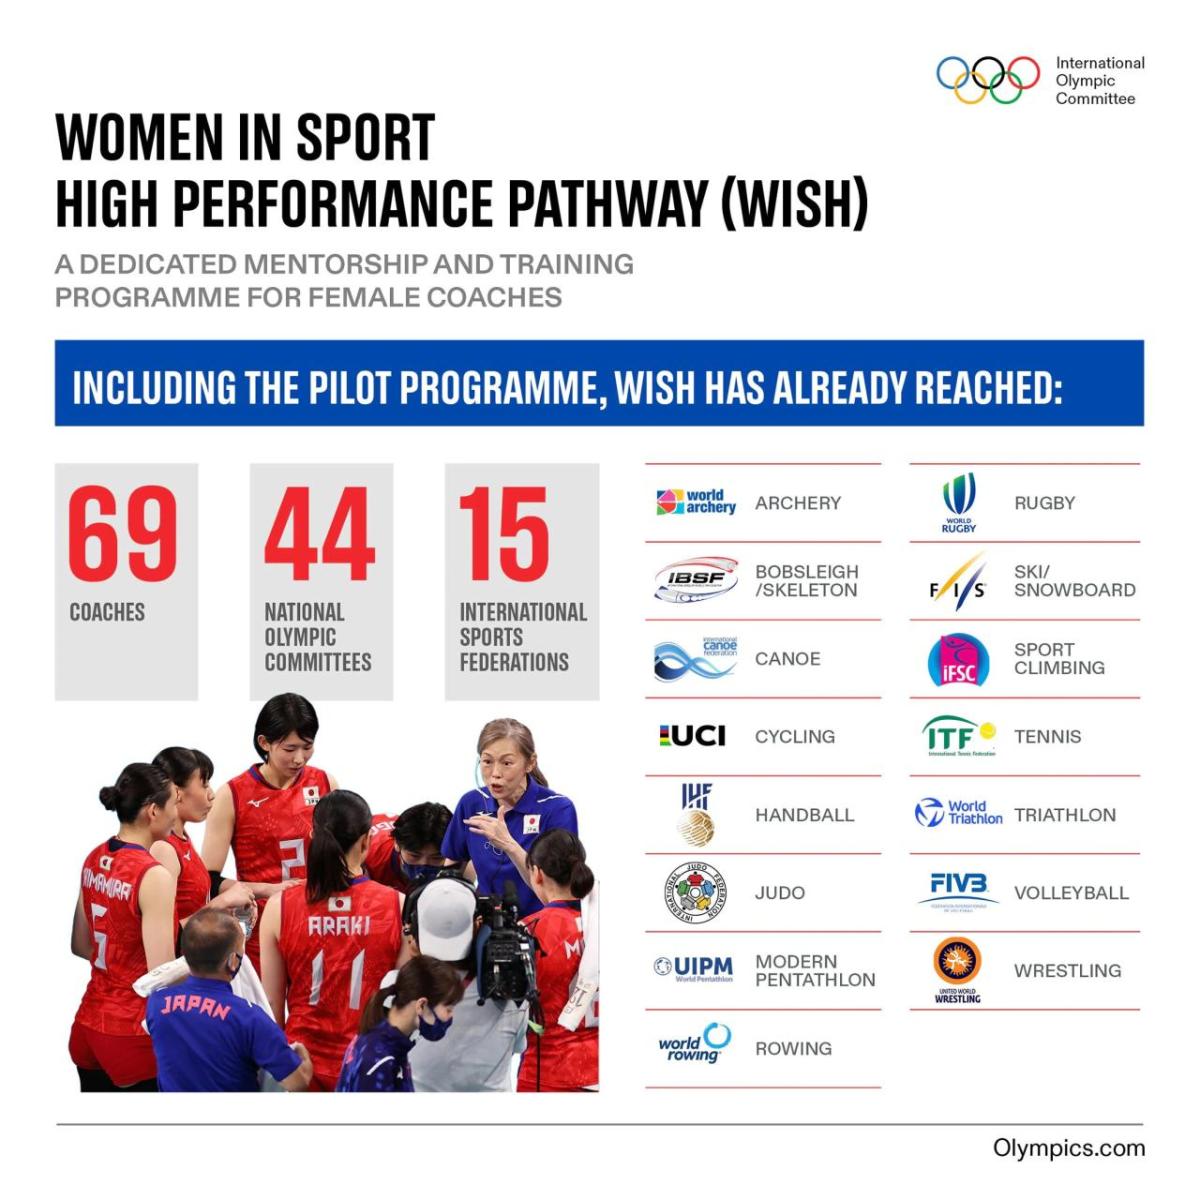 Info graphic: "Women in Sport High Performance Pathway (WISH) with statistics on the pilot programme and organizations it's working with.